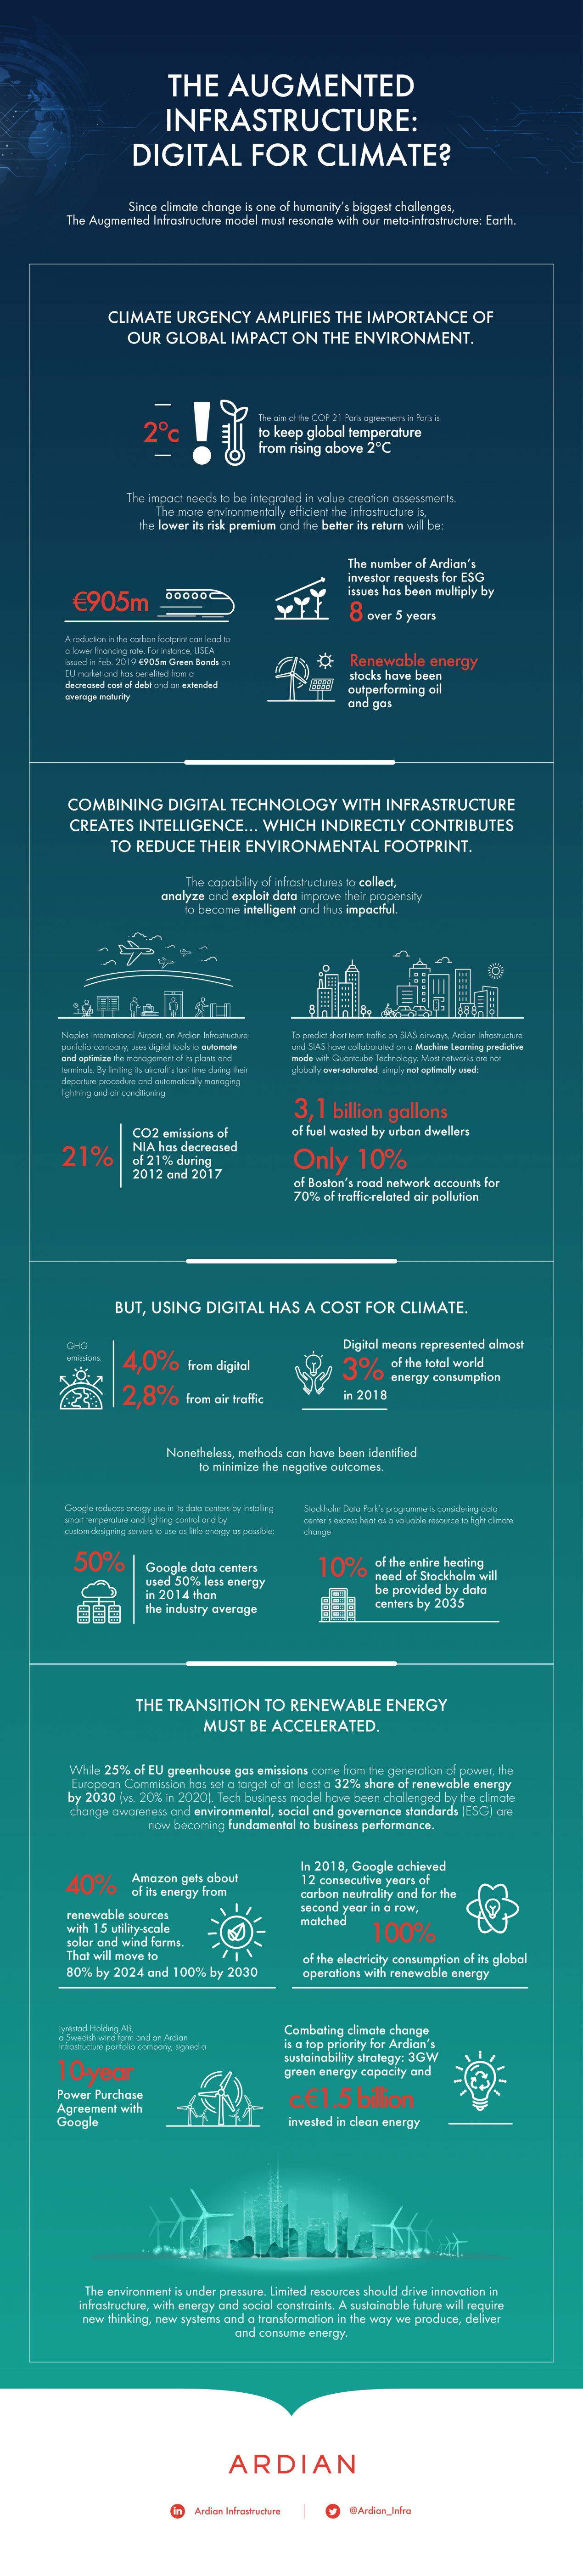 Infographic Augmented Infrastructure: Digital for climate?